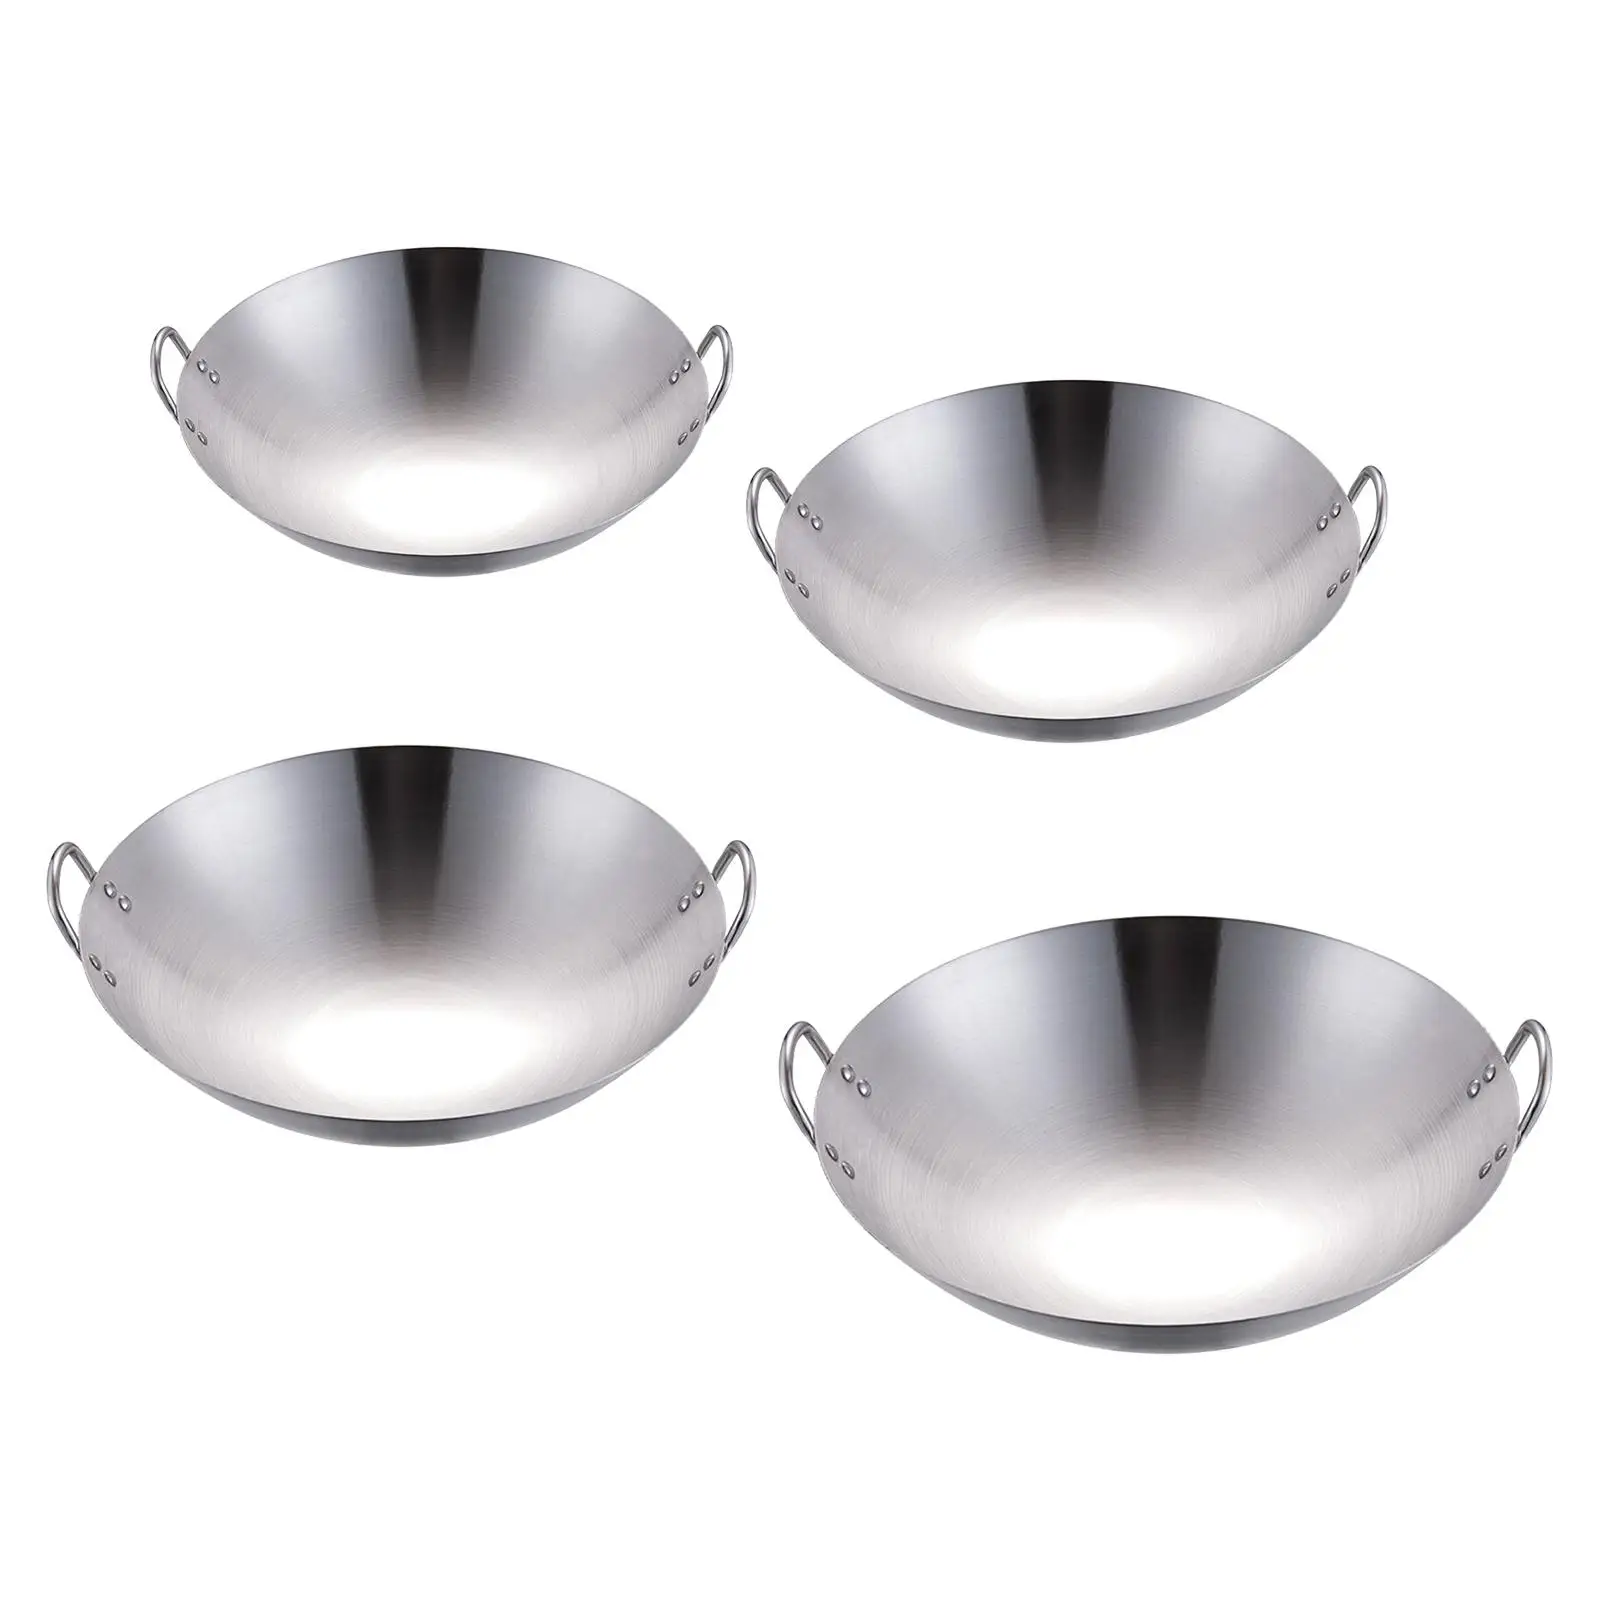 Steel Round Bottom Wok Dual Handle Frying Fry Pot for Cooking Eggs,Sausages, Fish